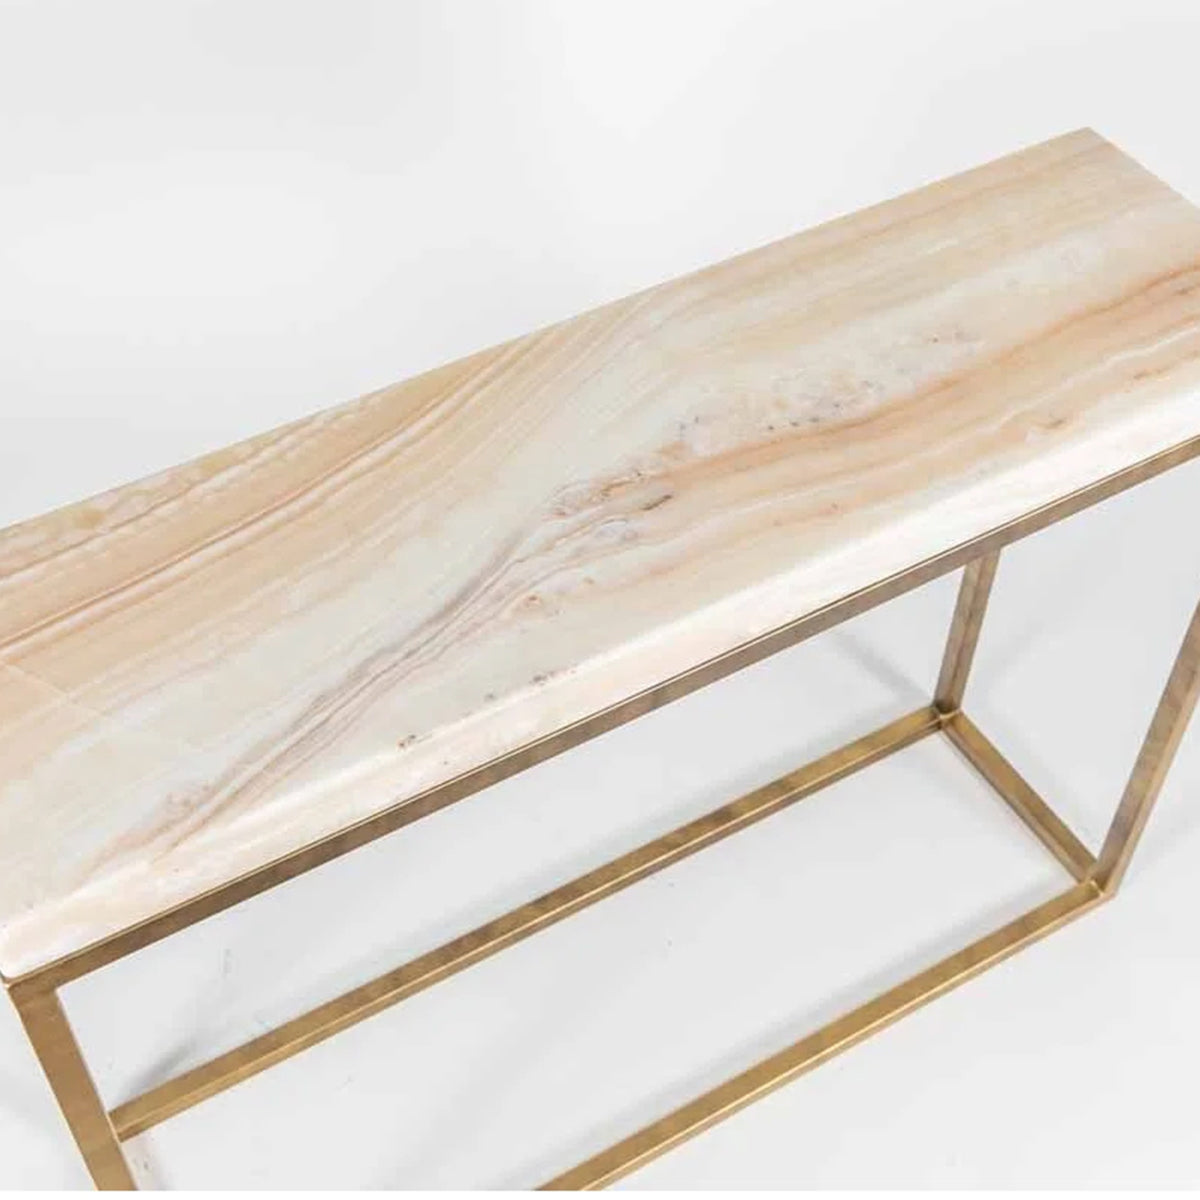 White Onyx Marble Table Top at Rs 1150/square feet